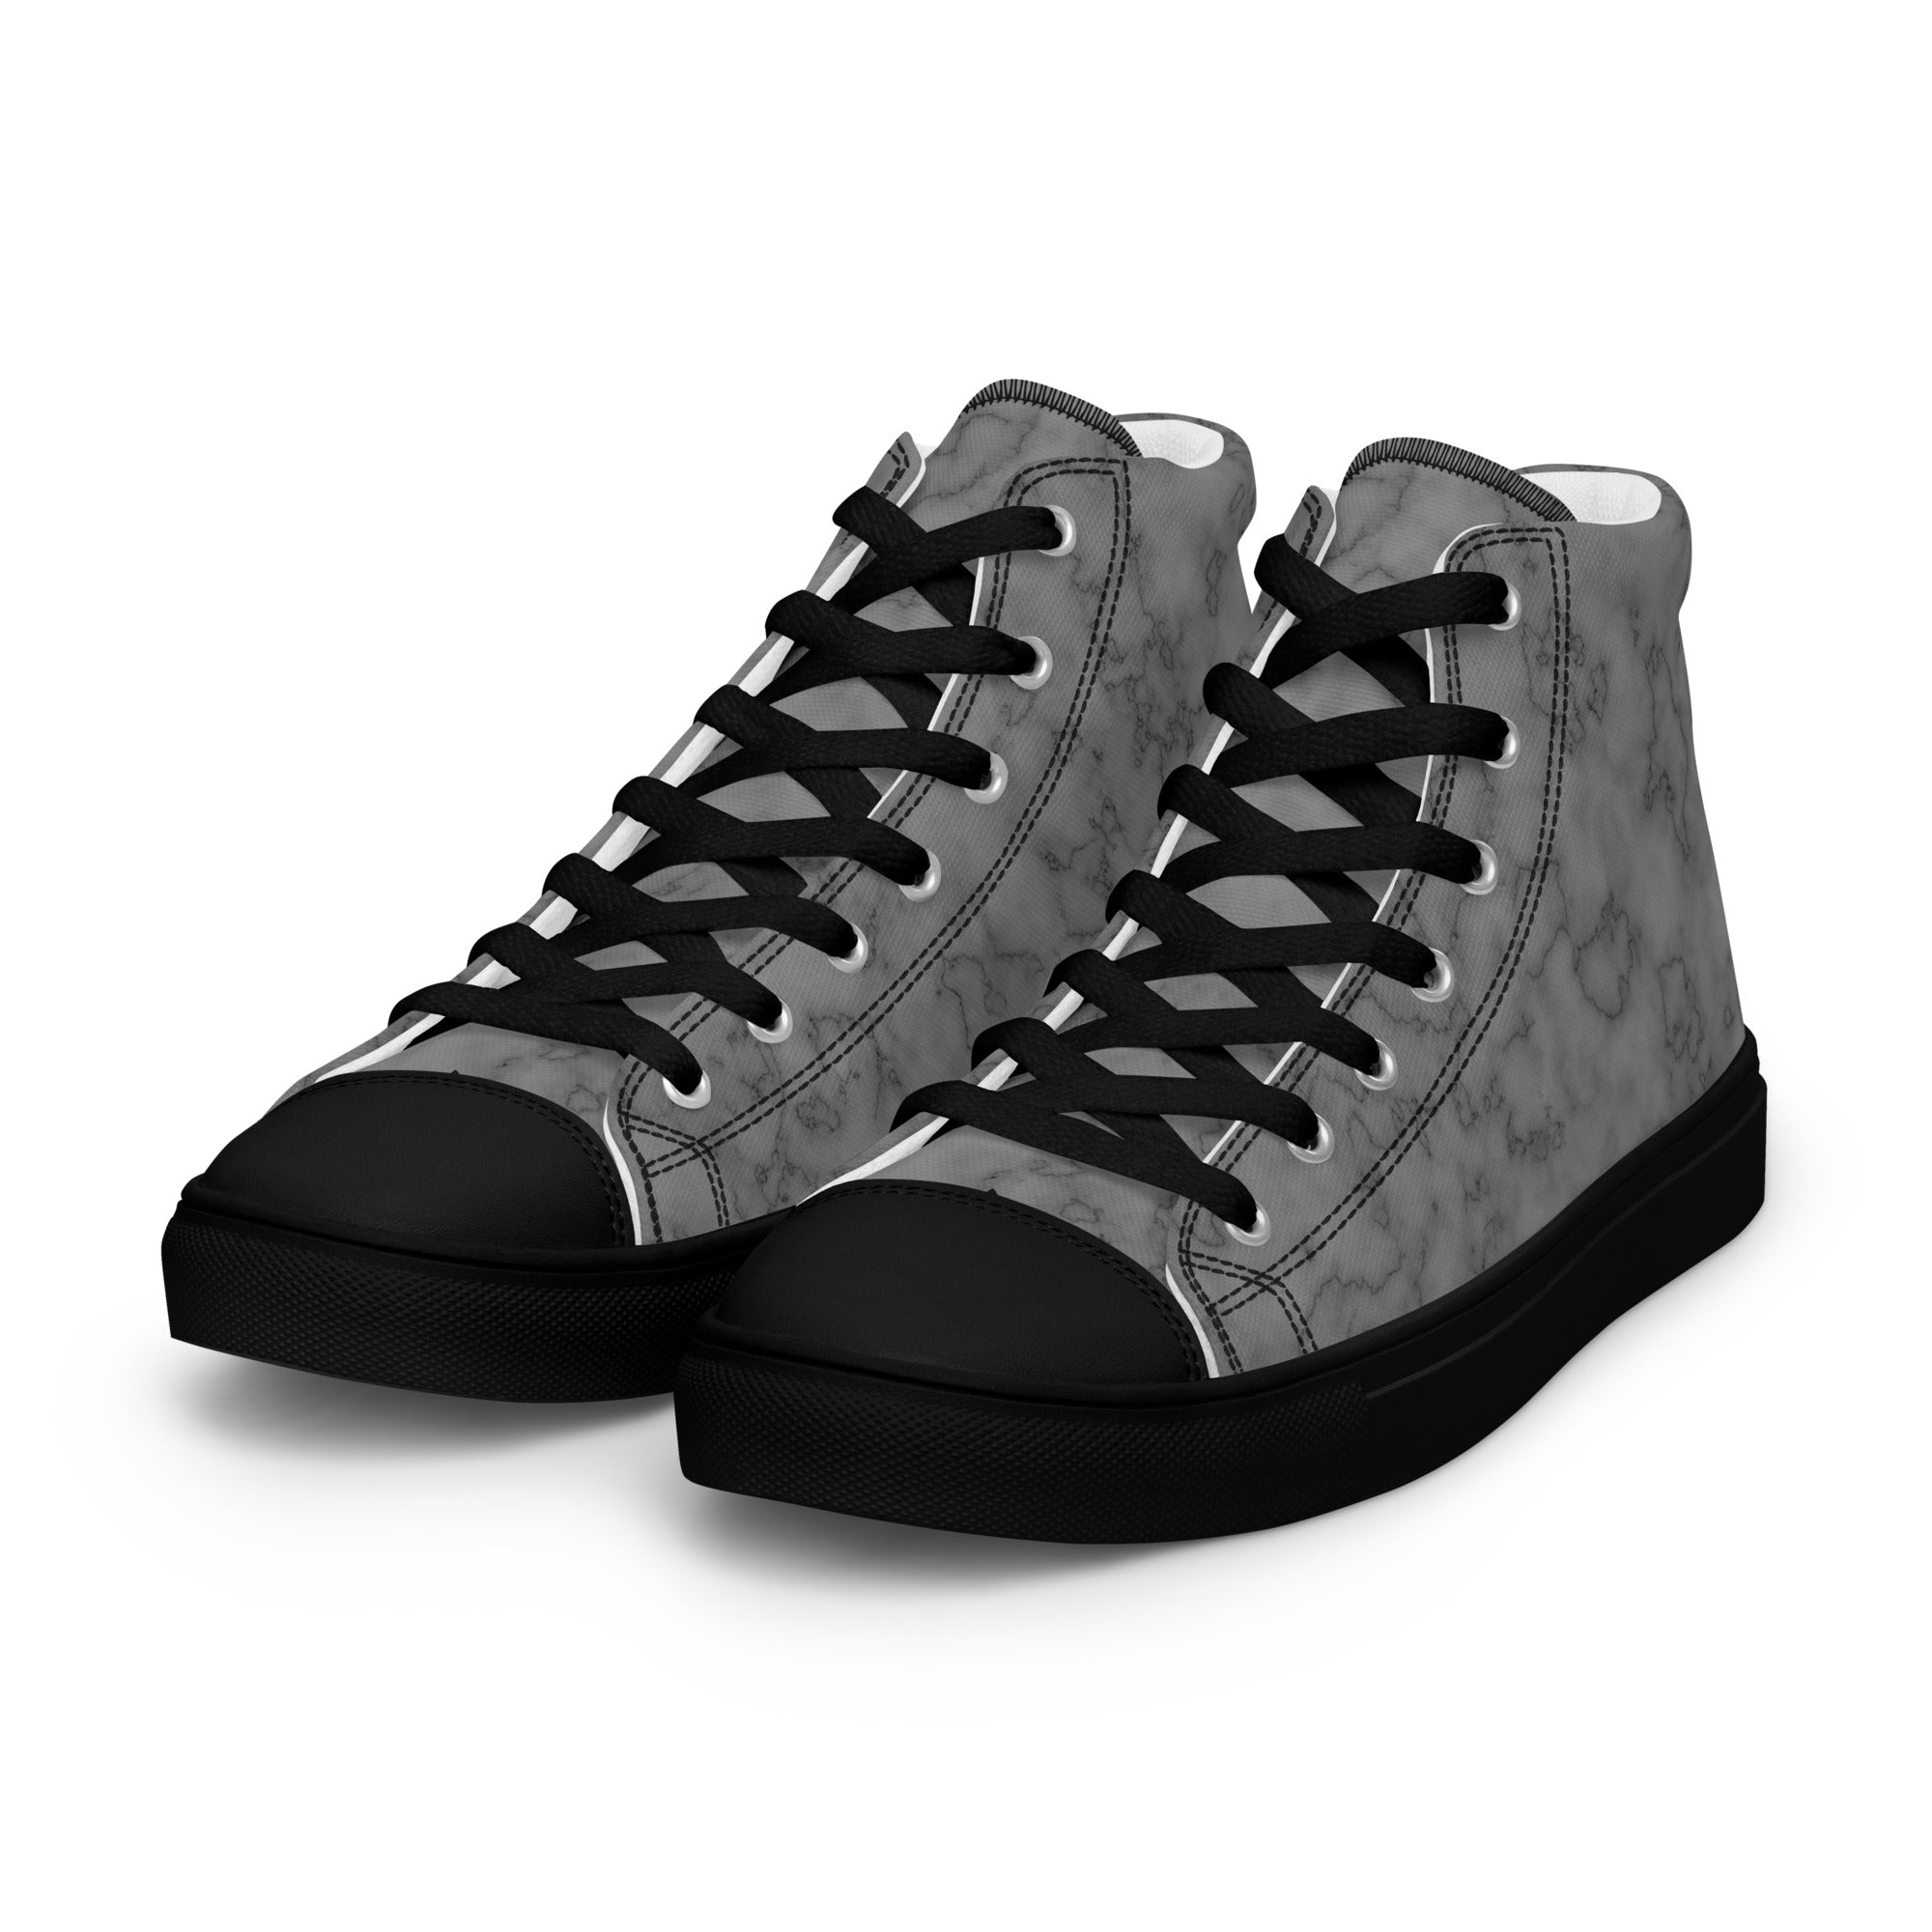 Women’s high top canvas shoes- Grey Marble